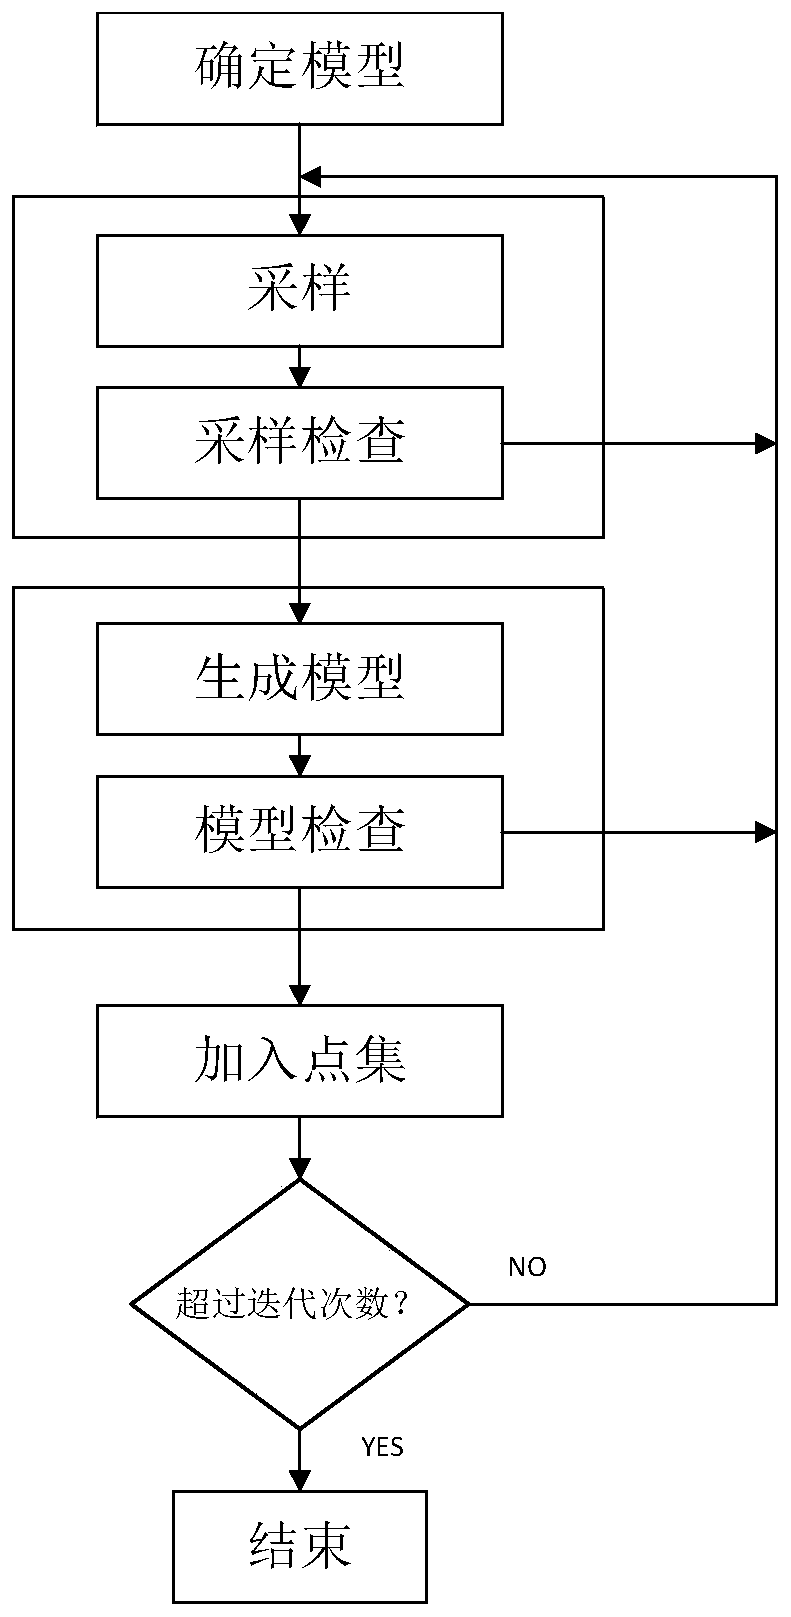 electric power line patrol LiDAR data automatic registration method based on tower characteristic points